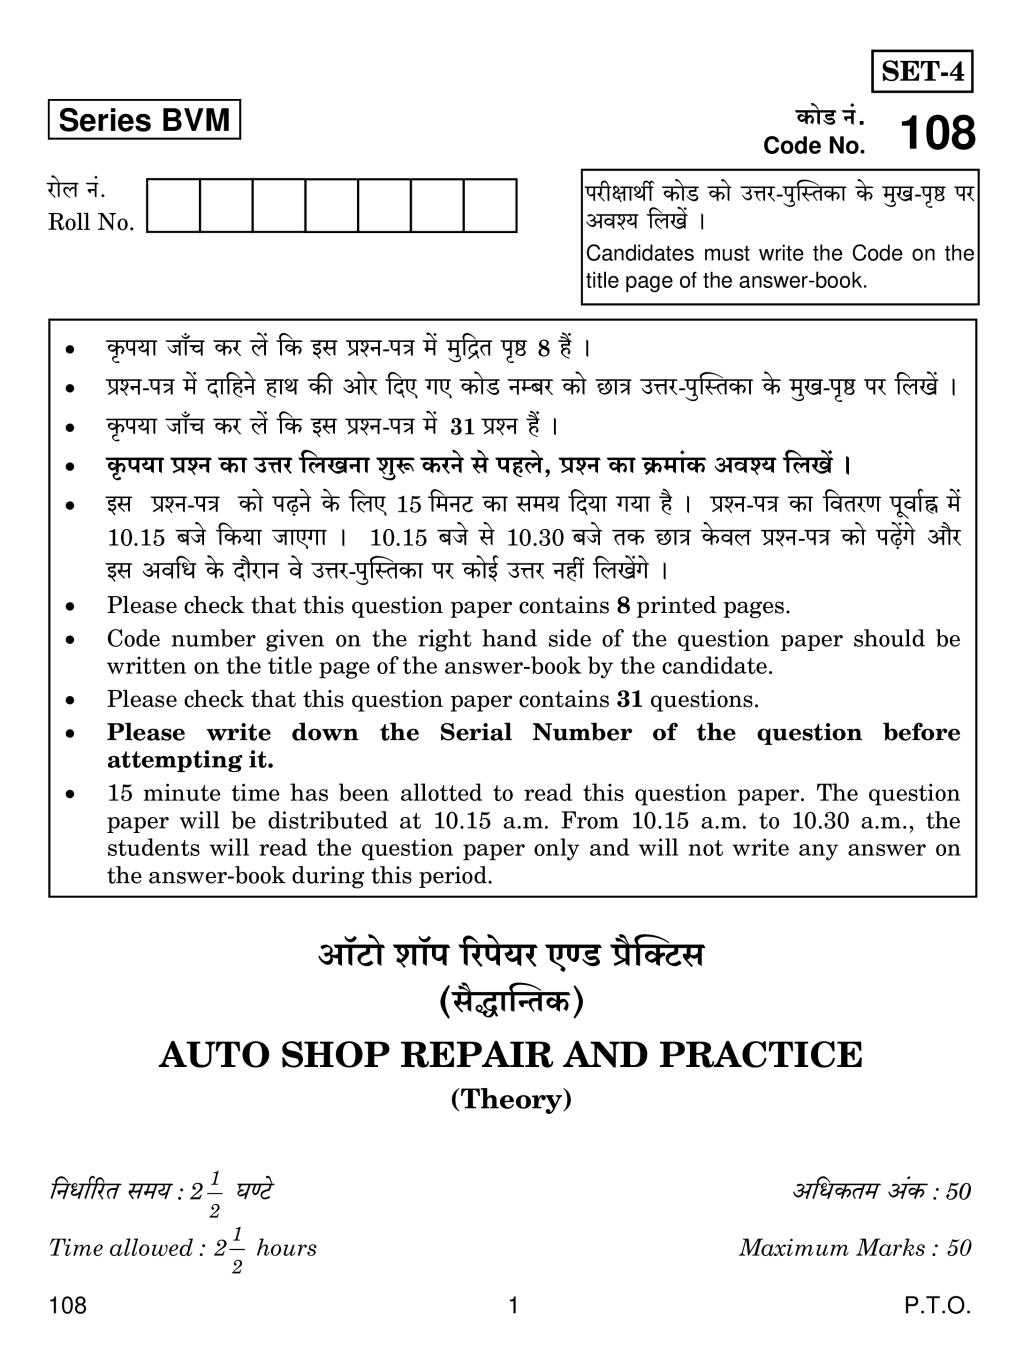 CBSE Class 12 Auto Shop and Repair and Practice Question Paper 2019 - Page 1